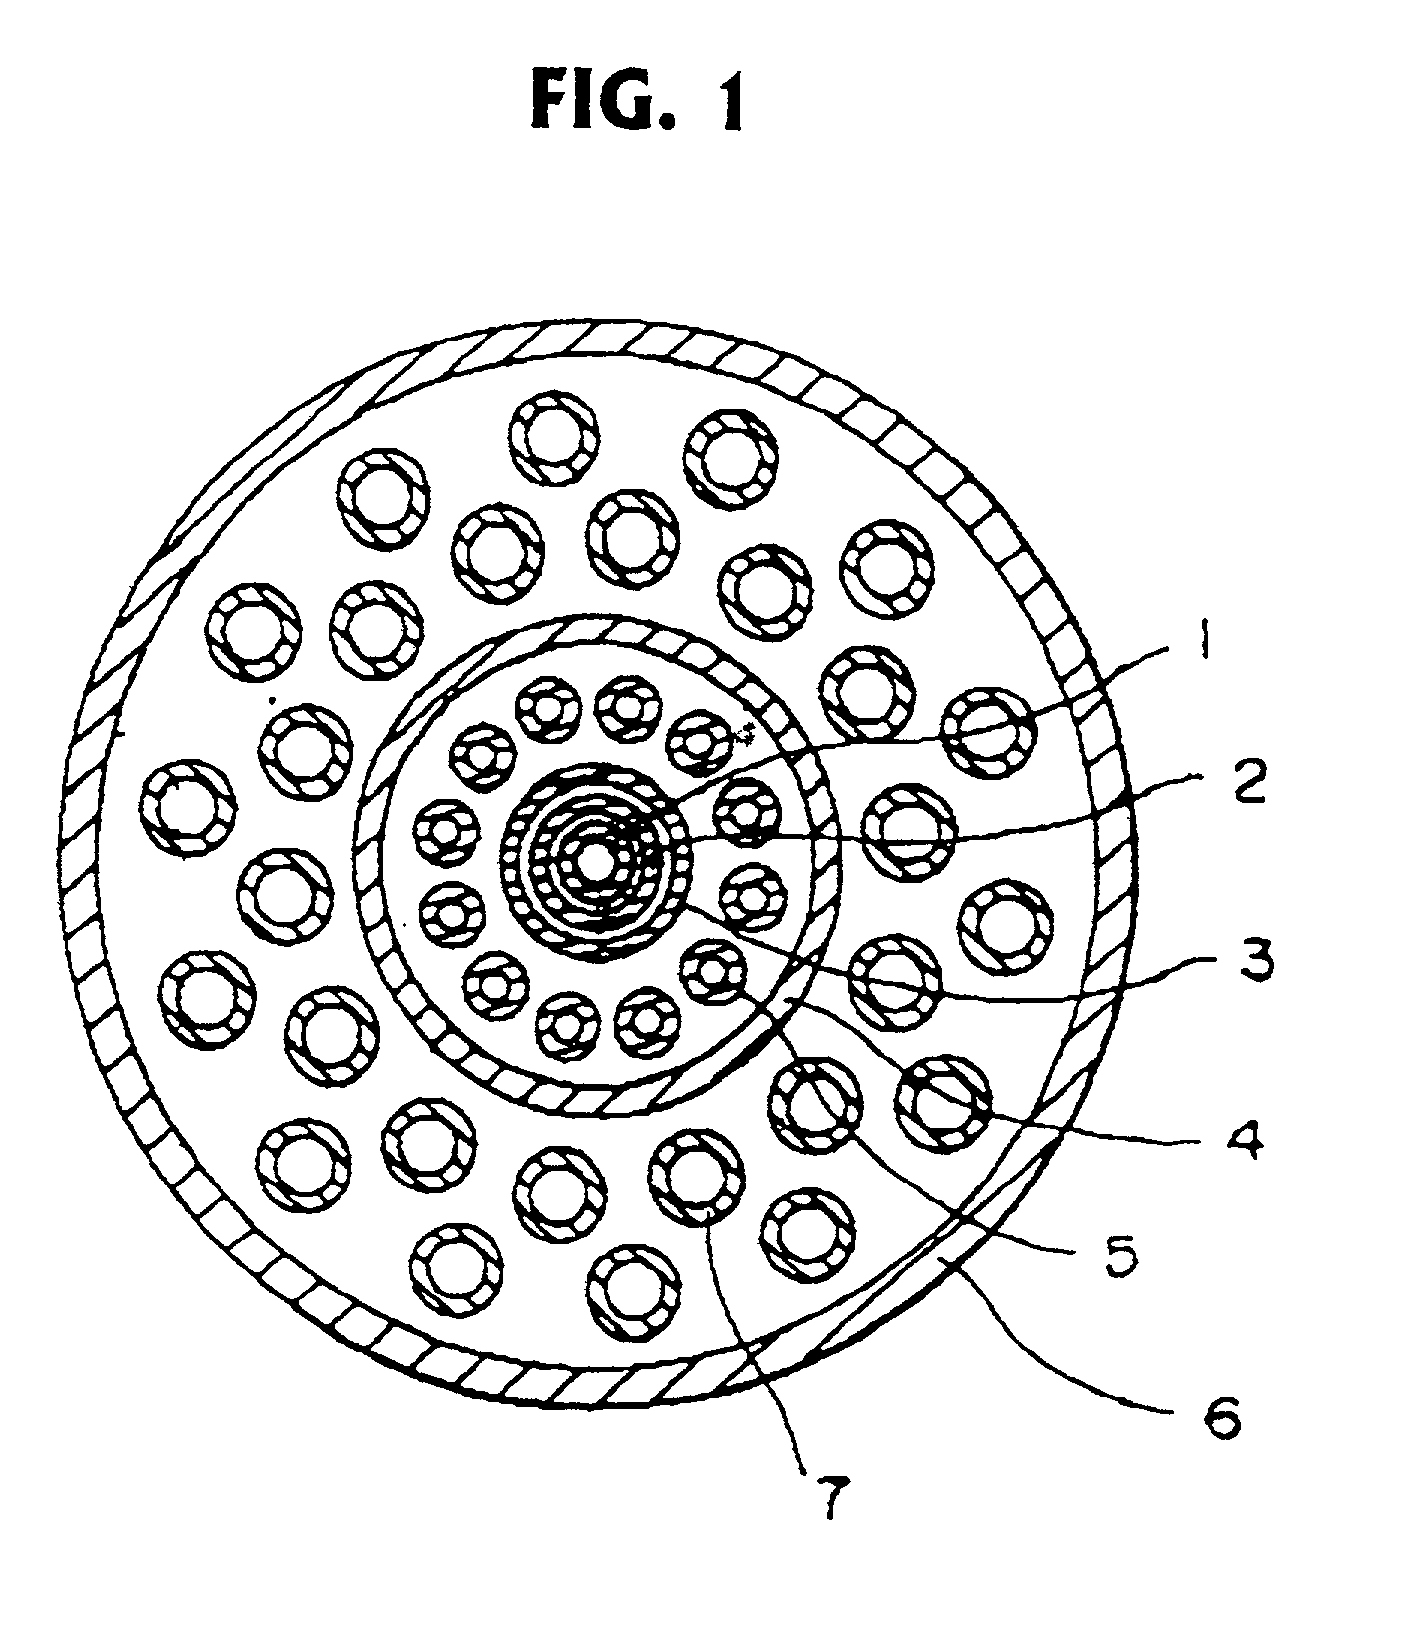 Synthetic silica glass optical member and method of manufacturing the same